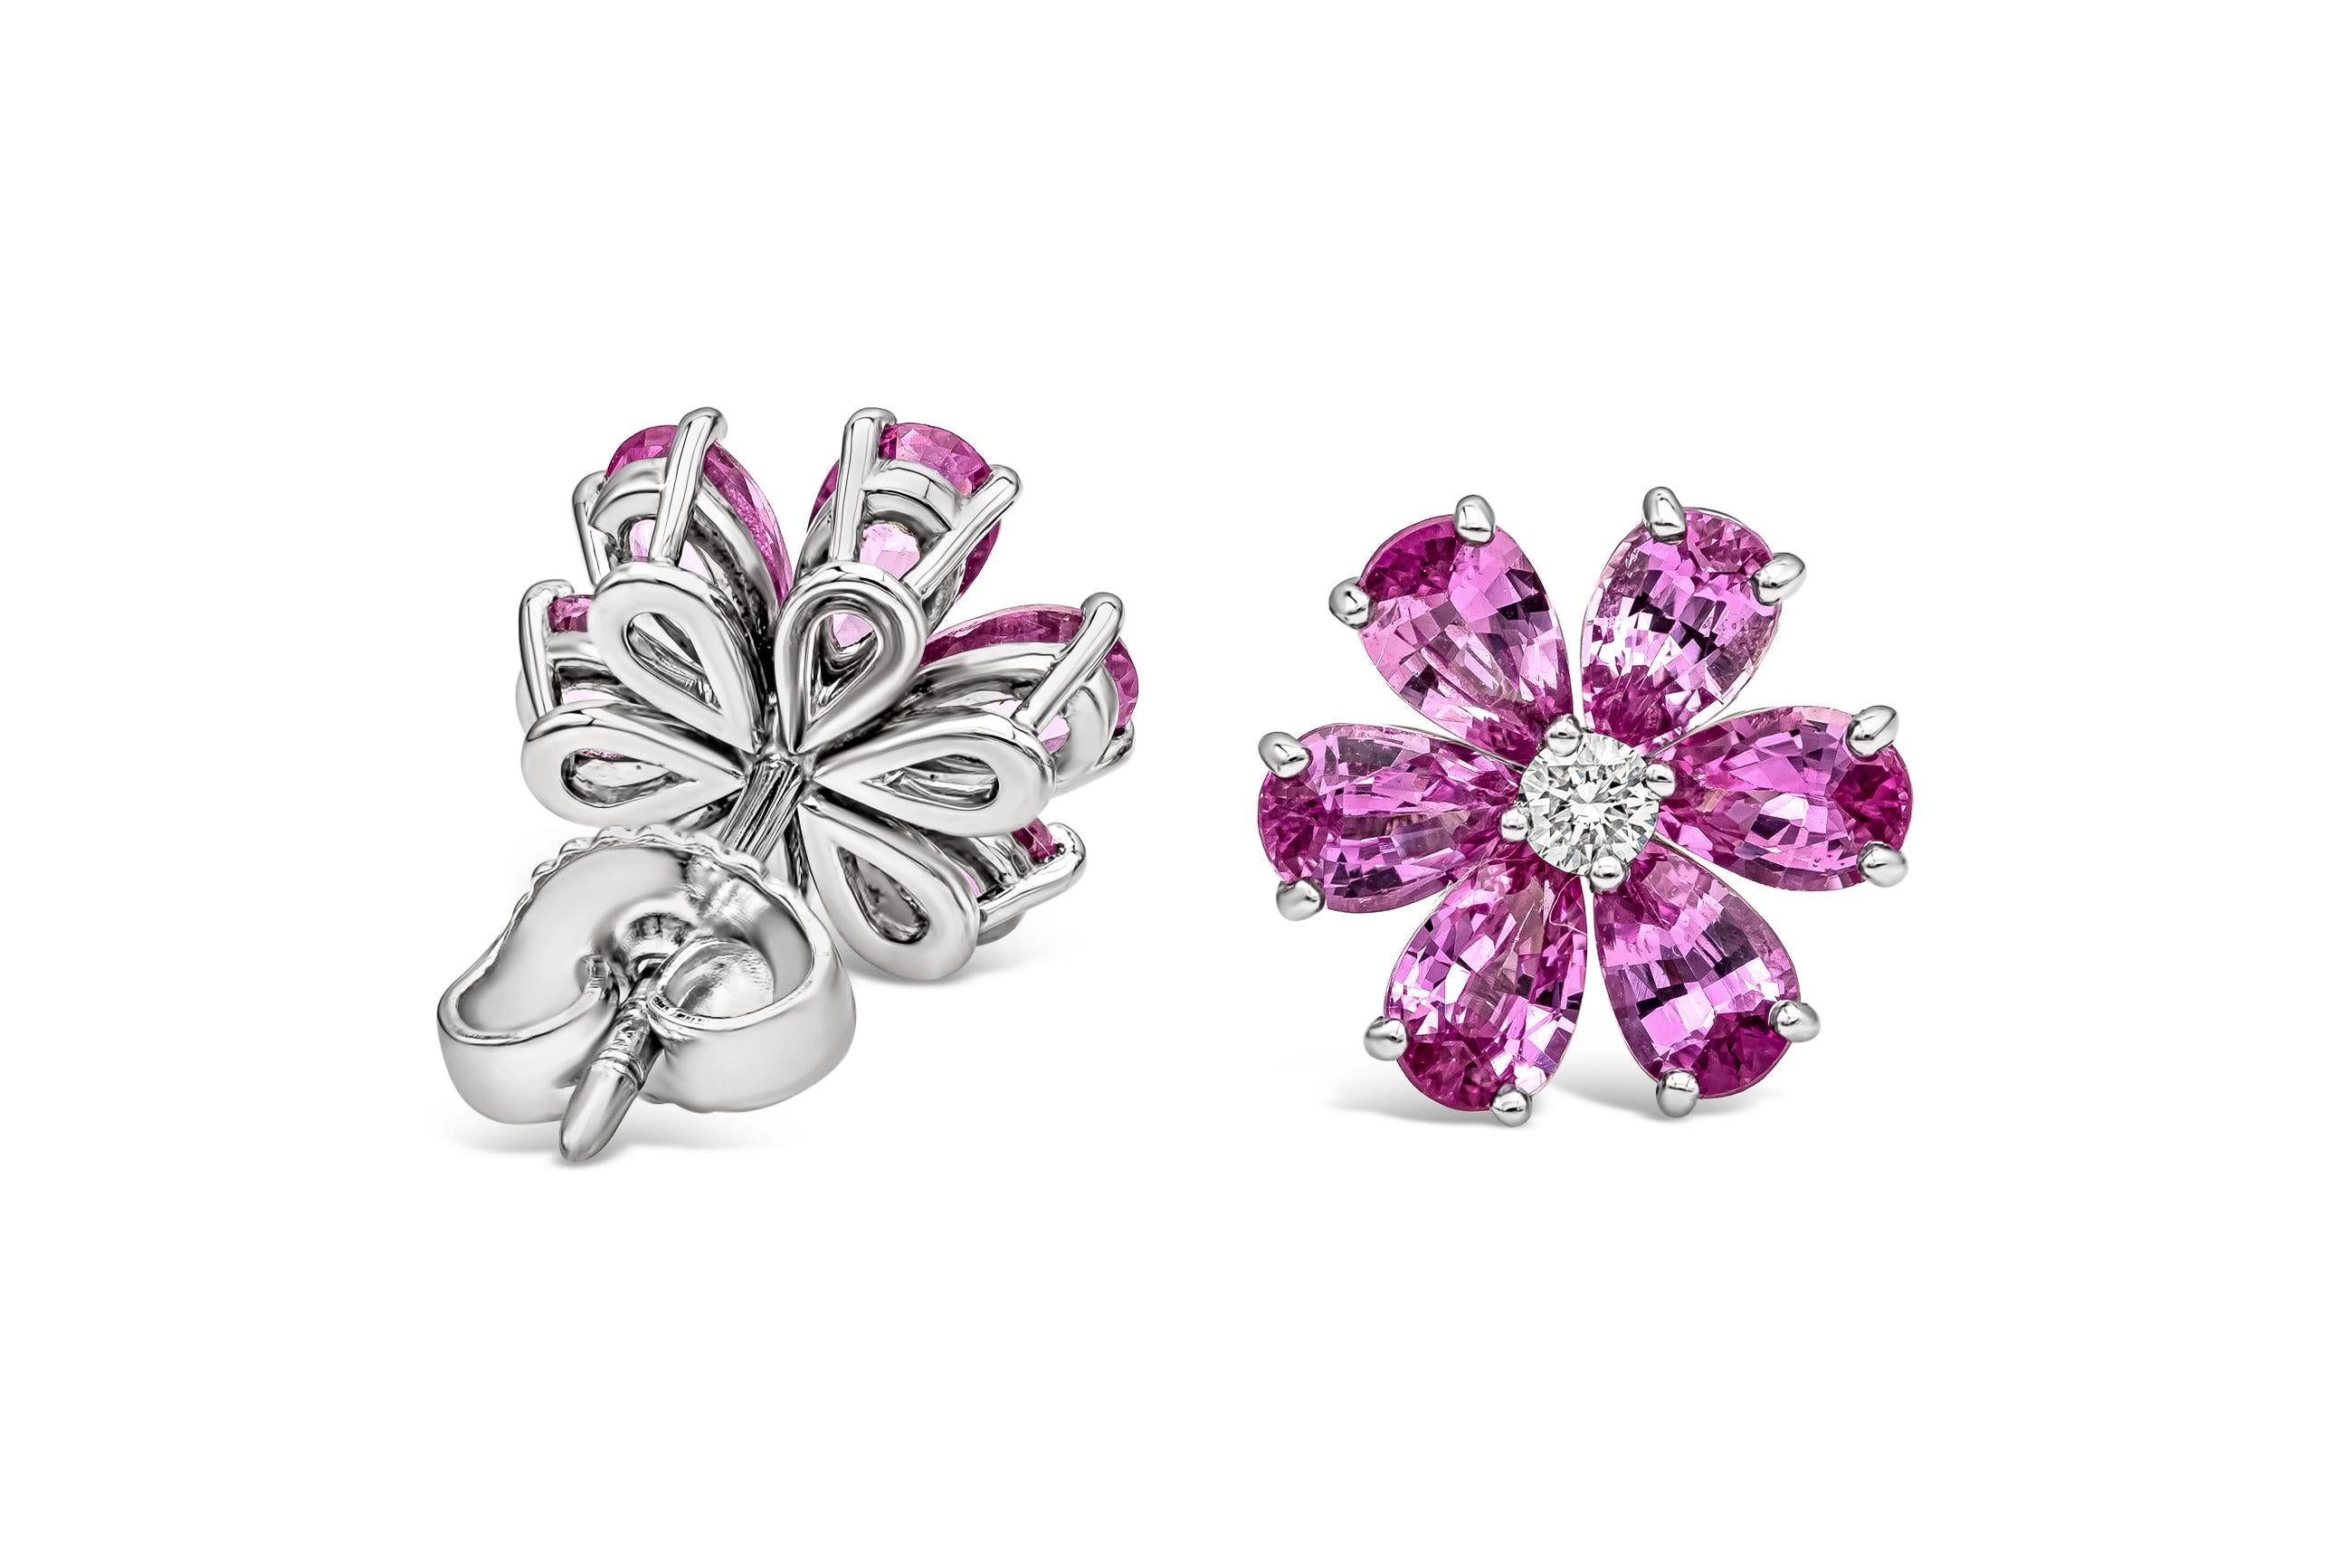 A very beautiful pair of stud earrings featuring a round brilliant diamond center, accented with color-rich pear shape pink sapphires set in a floral motif. Made in platinum.

Style available in different price ranges. Prices are based on your